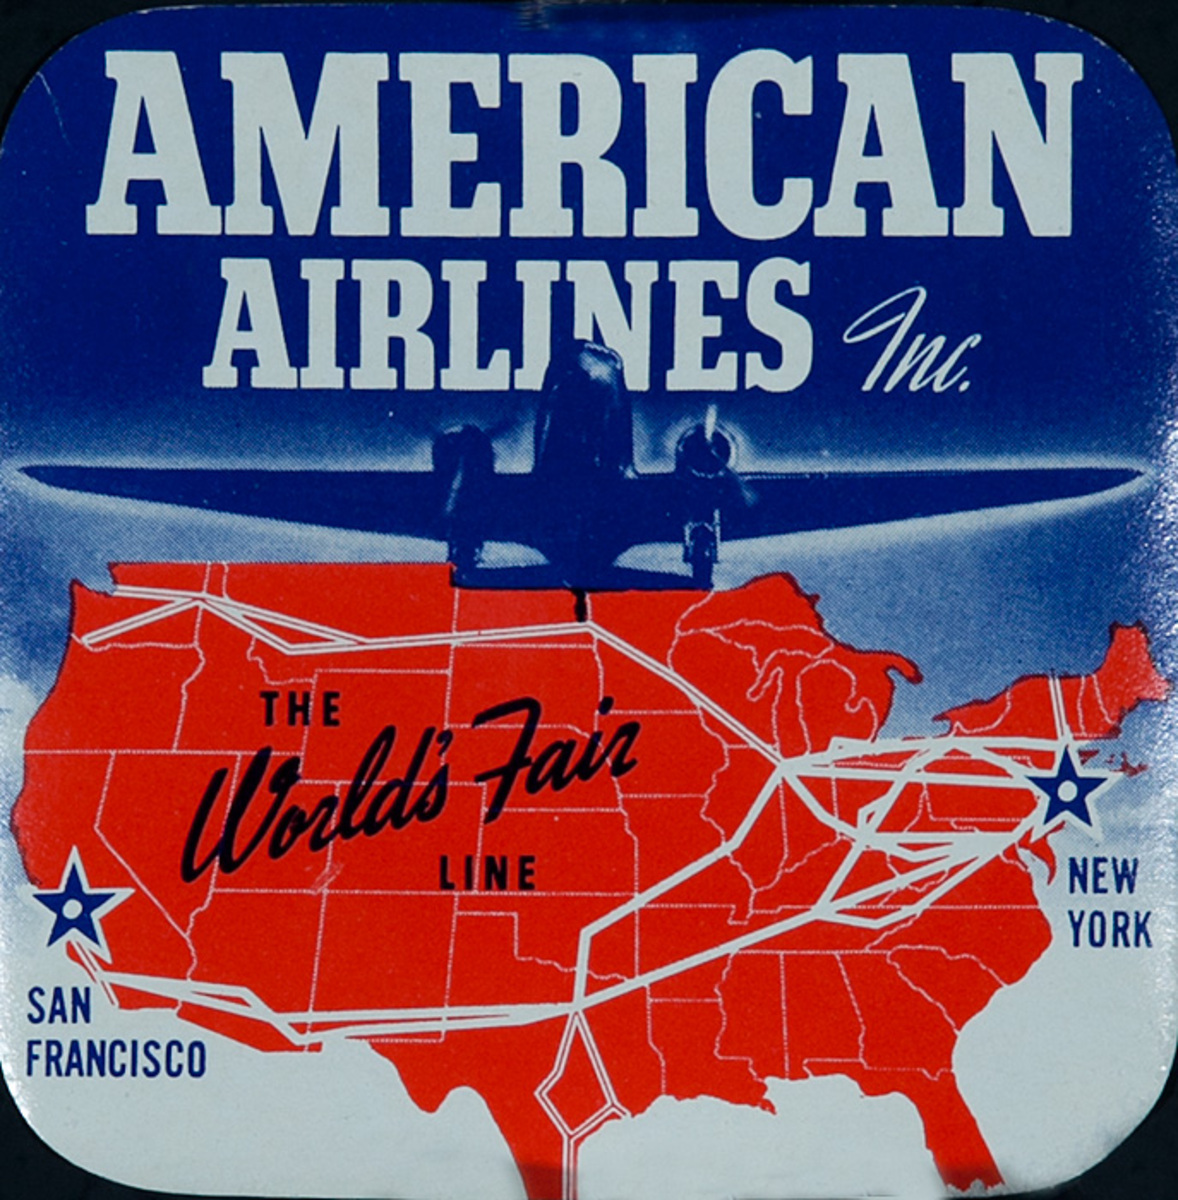 American Airlines The World's Fair Line Original Luggage Label